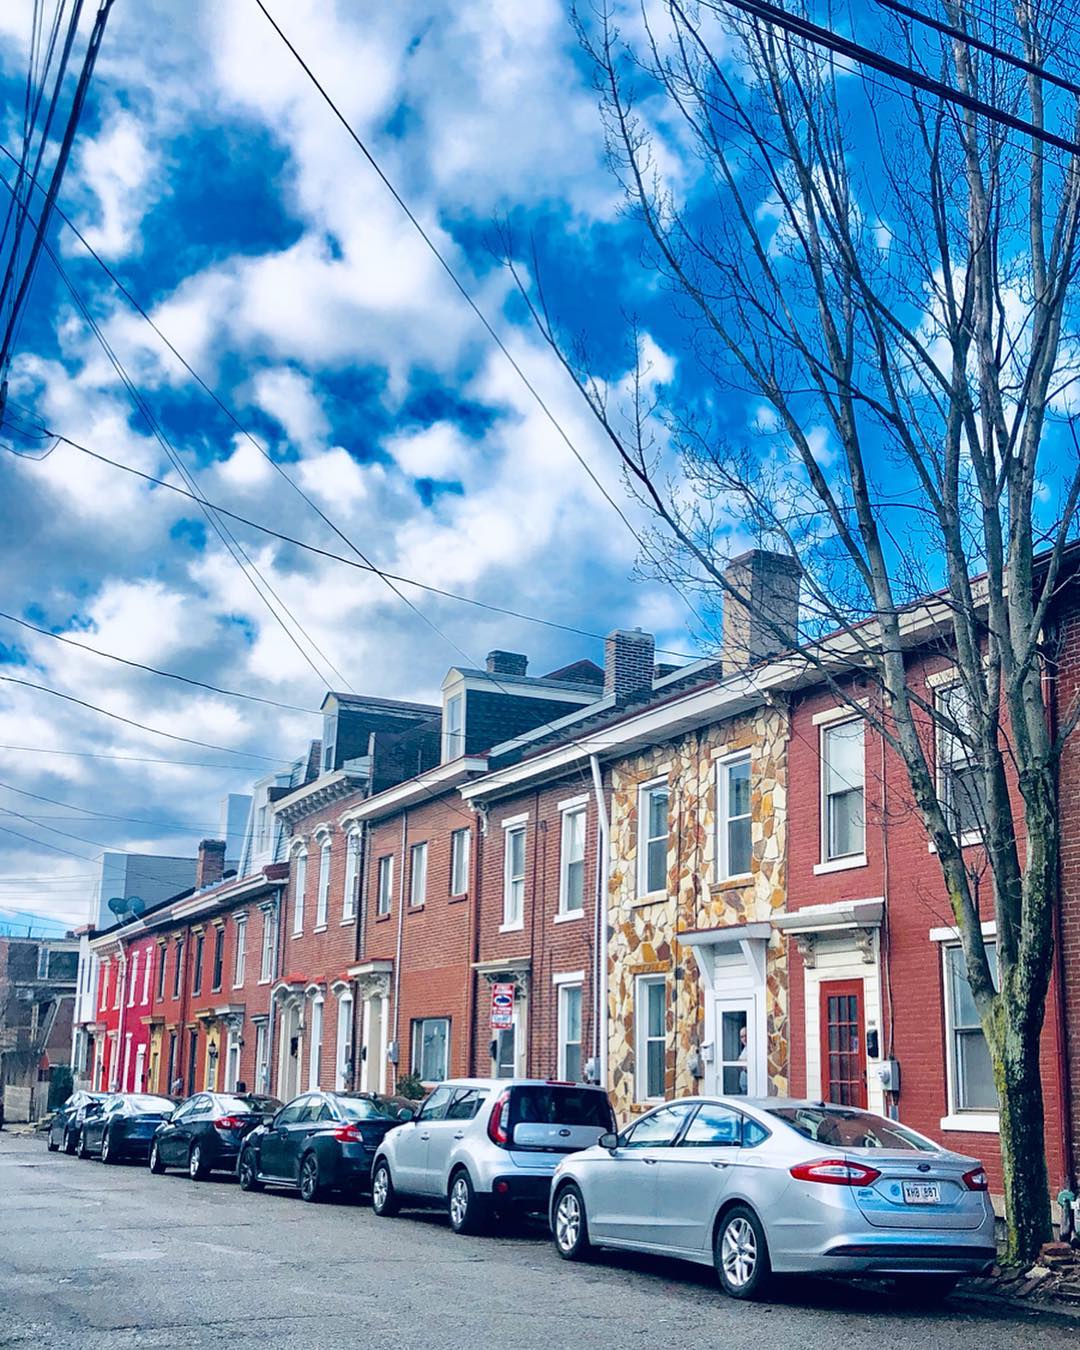 Red, yellow and white townhomes line the street stacked side by side with cars parked outside. Photo by Instagram user @shelbiemoser